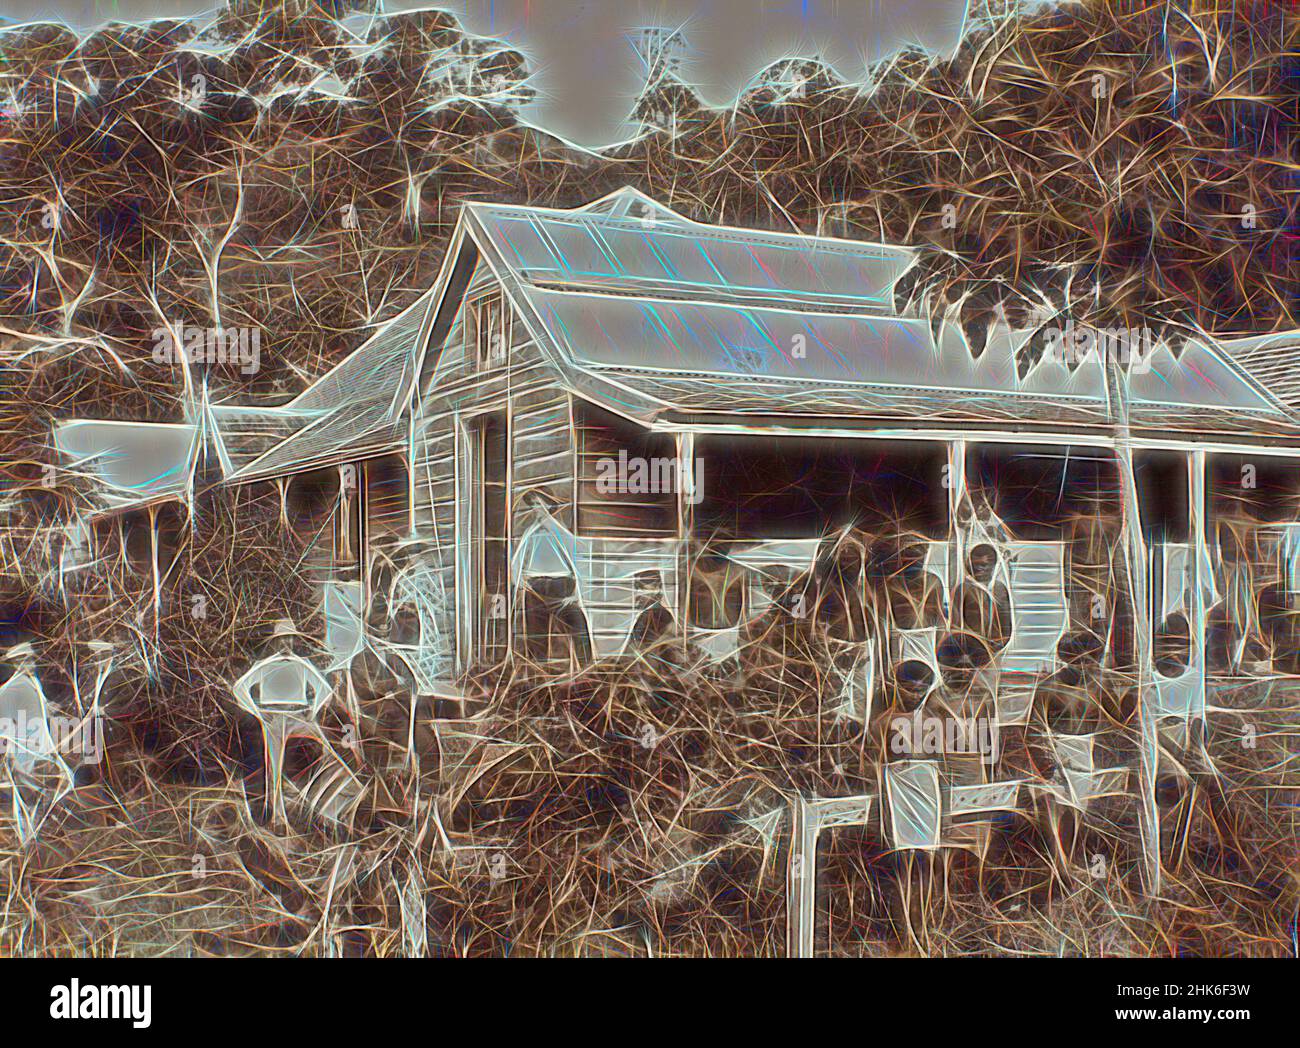 Inspired by The Hospital - Levuka - Fiji, Burton Brothers studio, photography studio, 1884, Dunedin, photography, Reimagined by Artotop. Classic art reinvented with a modern twist. Design of warm cheerful glowing of brightness and light ray radiance. Photography inspired by surrealism and futurism, embracing dynamic energy of modern technology, movement, speed and revolutionize culture Stock Photo